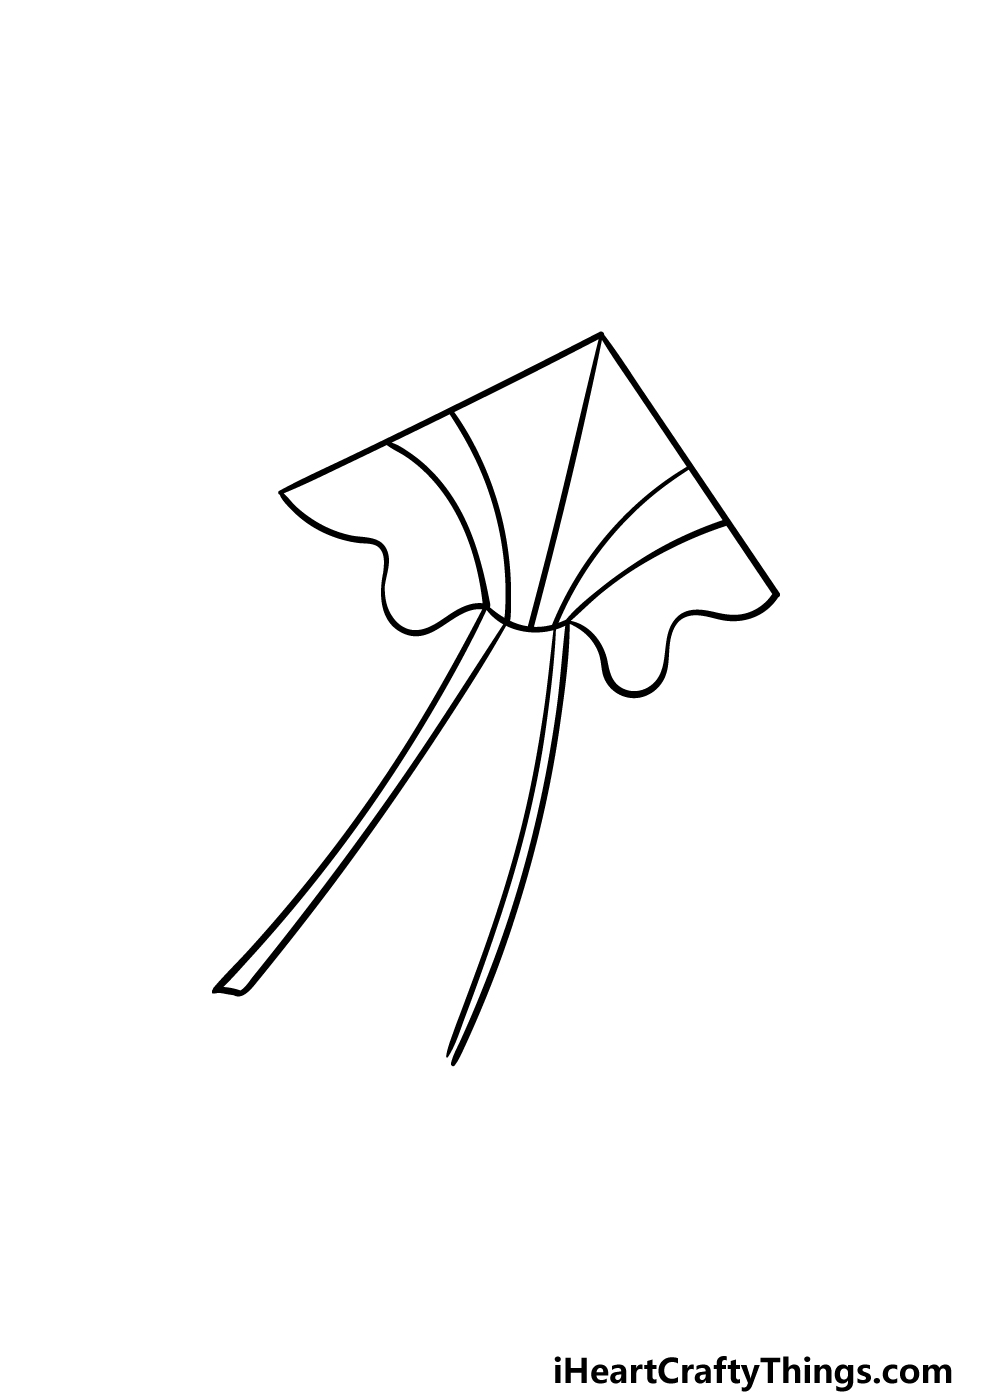 how to draw a kite step 2